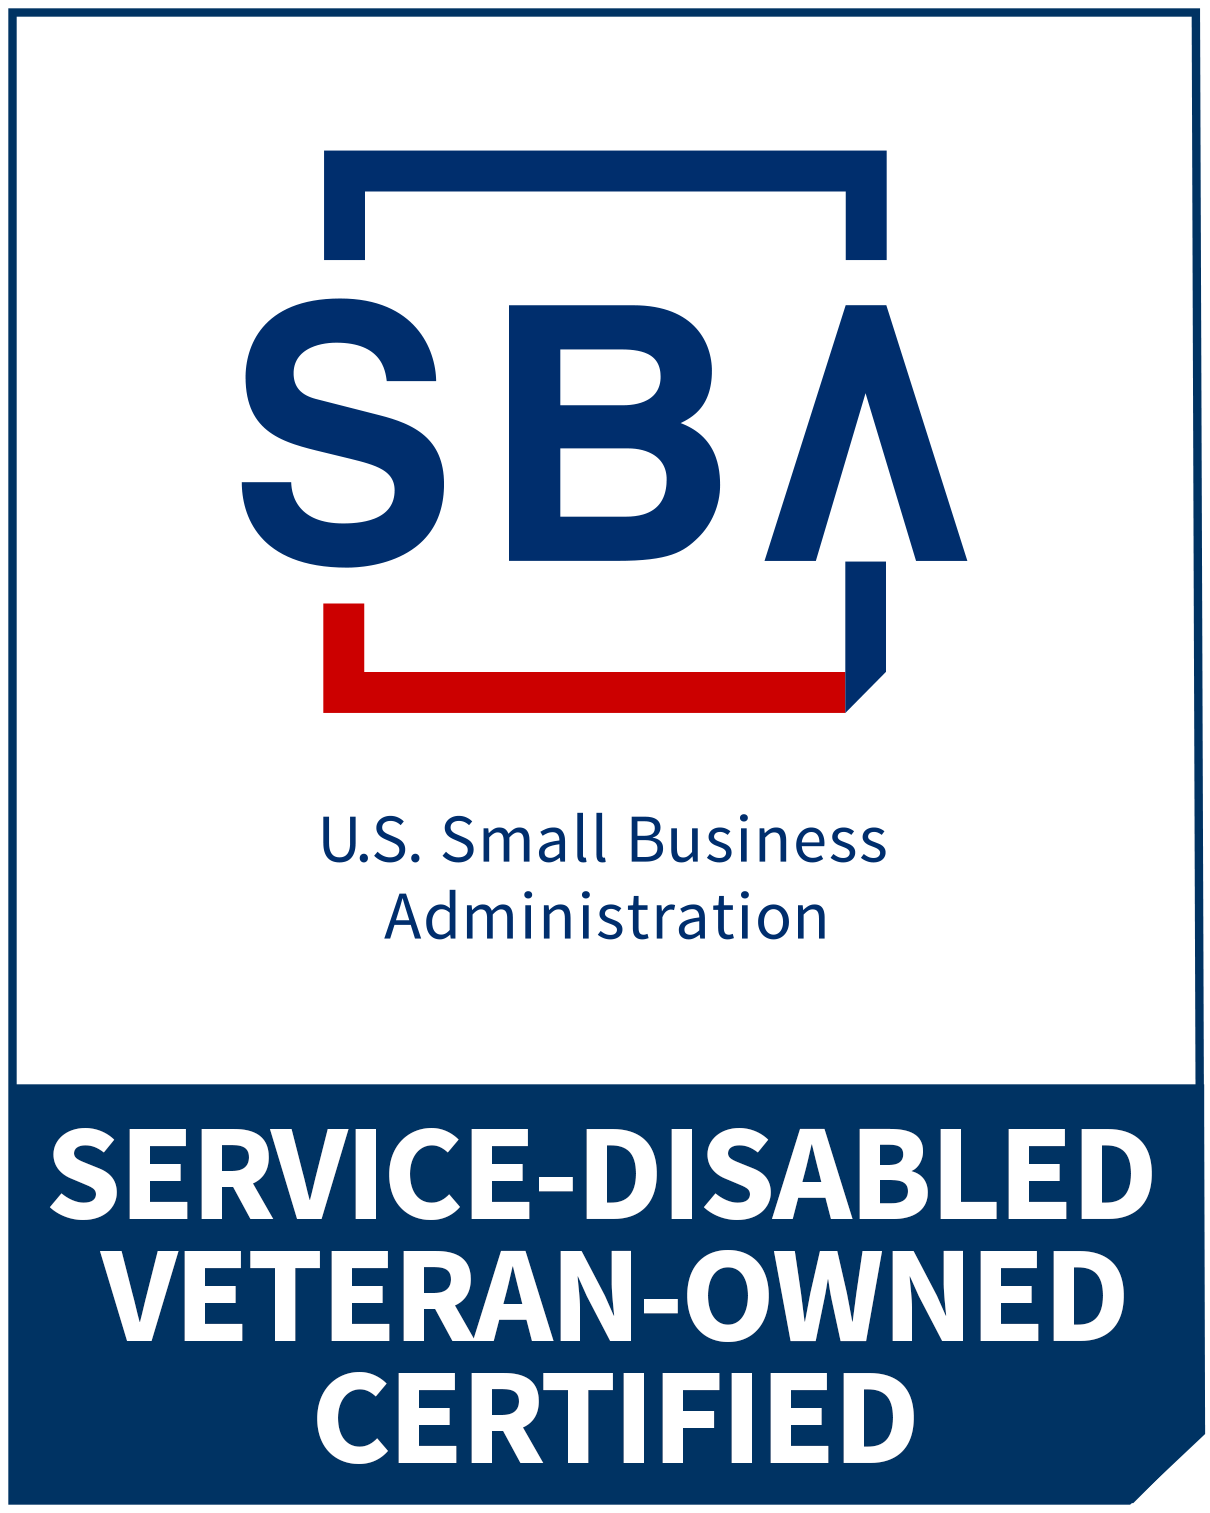 SBA Service Disabled Veteran-Owned Certified logo